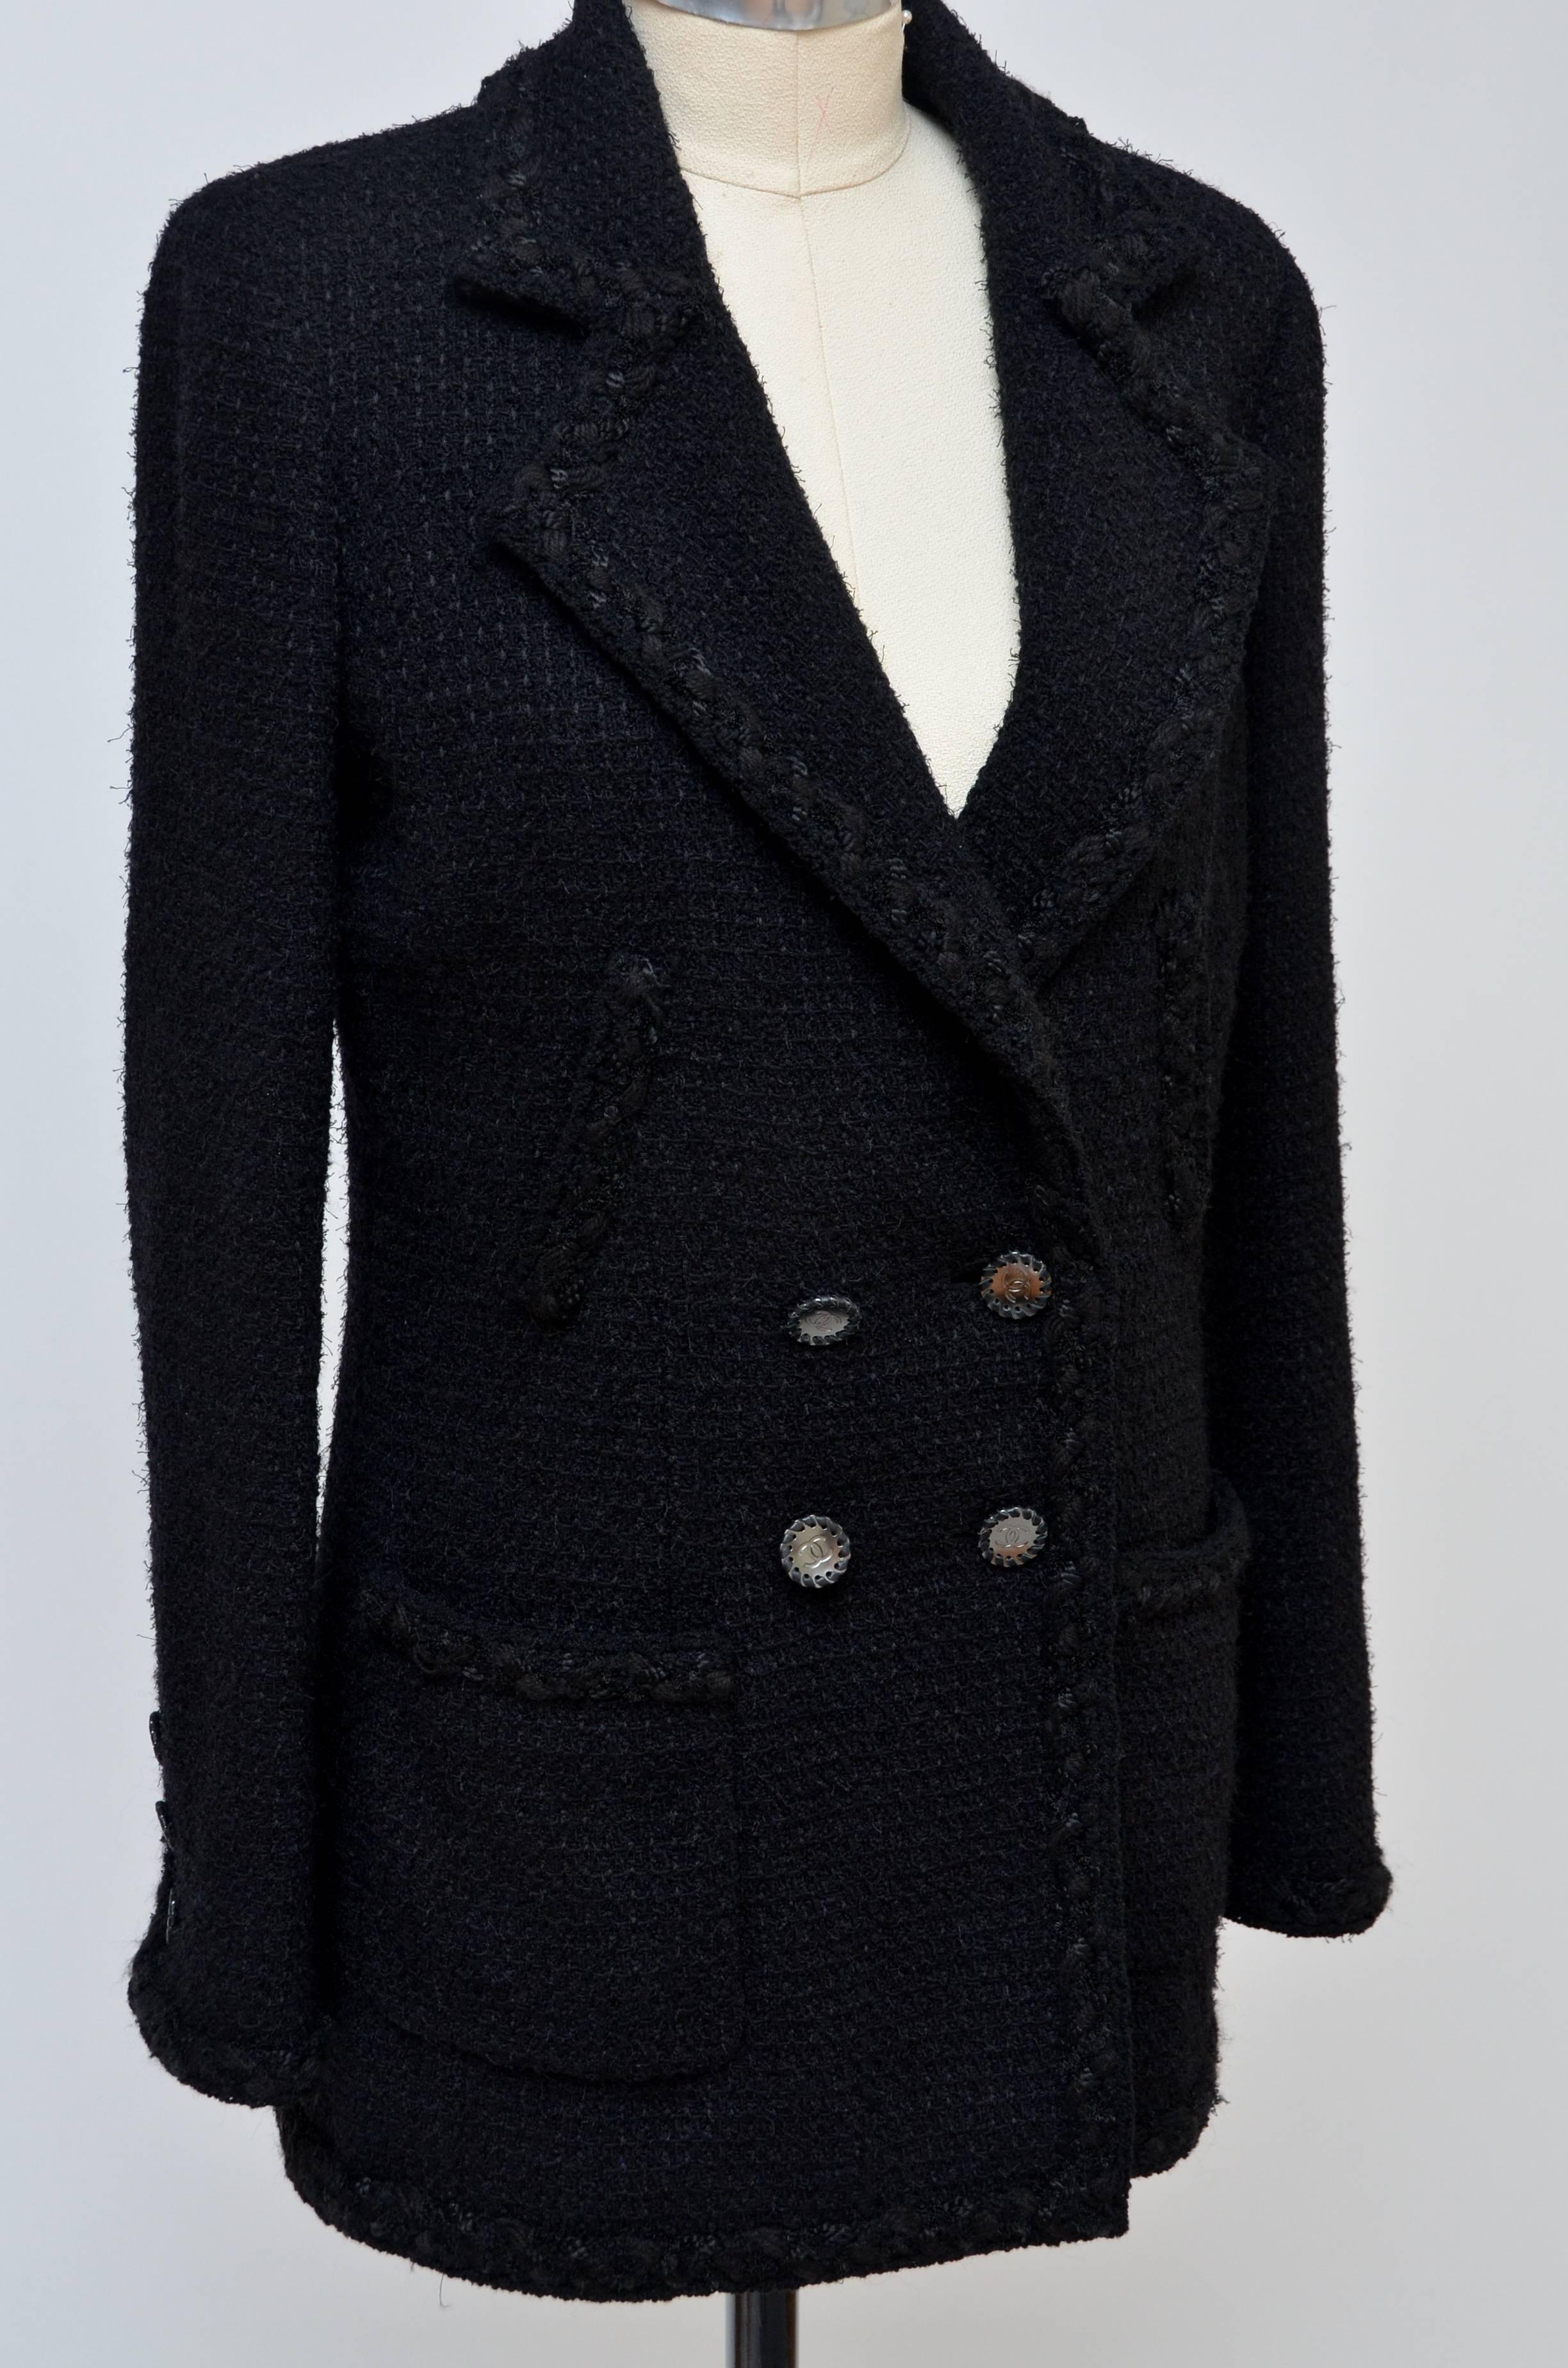 Impossible to find Chanel black tweed jacket.
Very rare and highly desirable black jacket.
This beauty is from the same collection as famous black jacket that every woman want in their closet...
Made of exact same fabric and same  CC  metal 